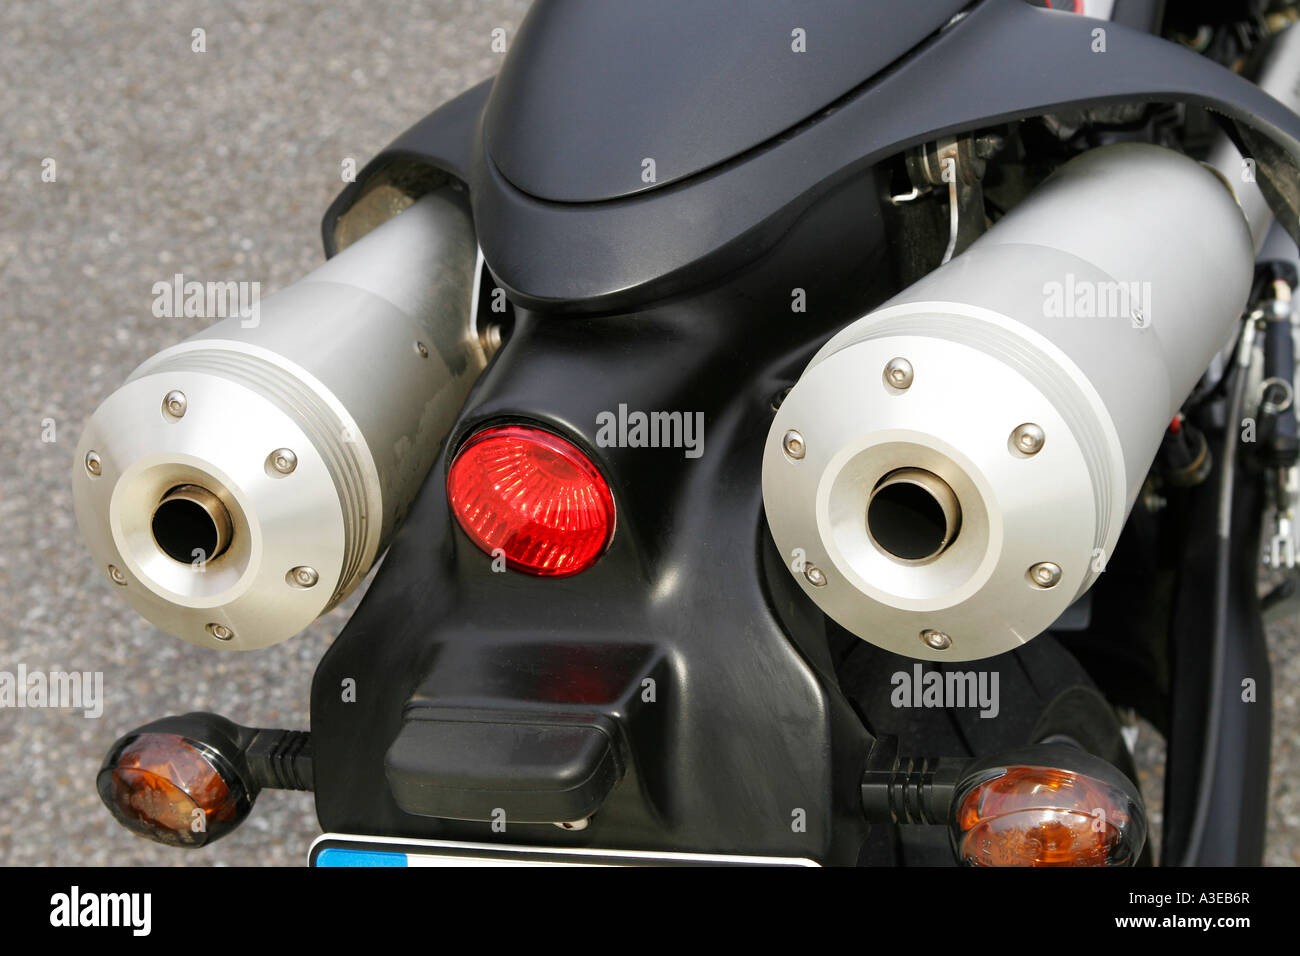 Exhaust pipe motorcycle Stock Photo